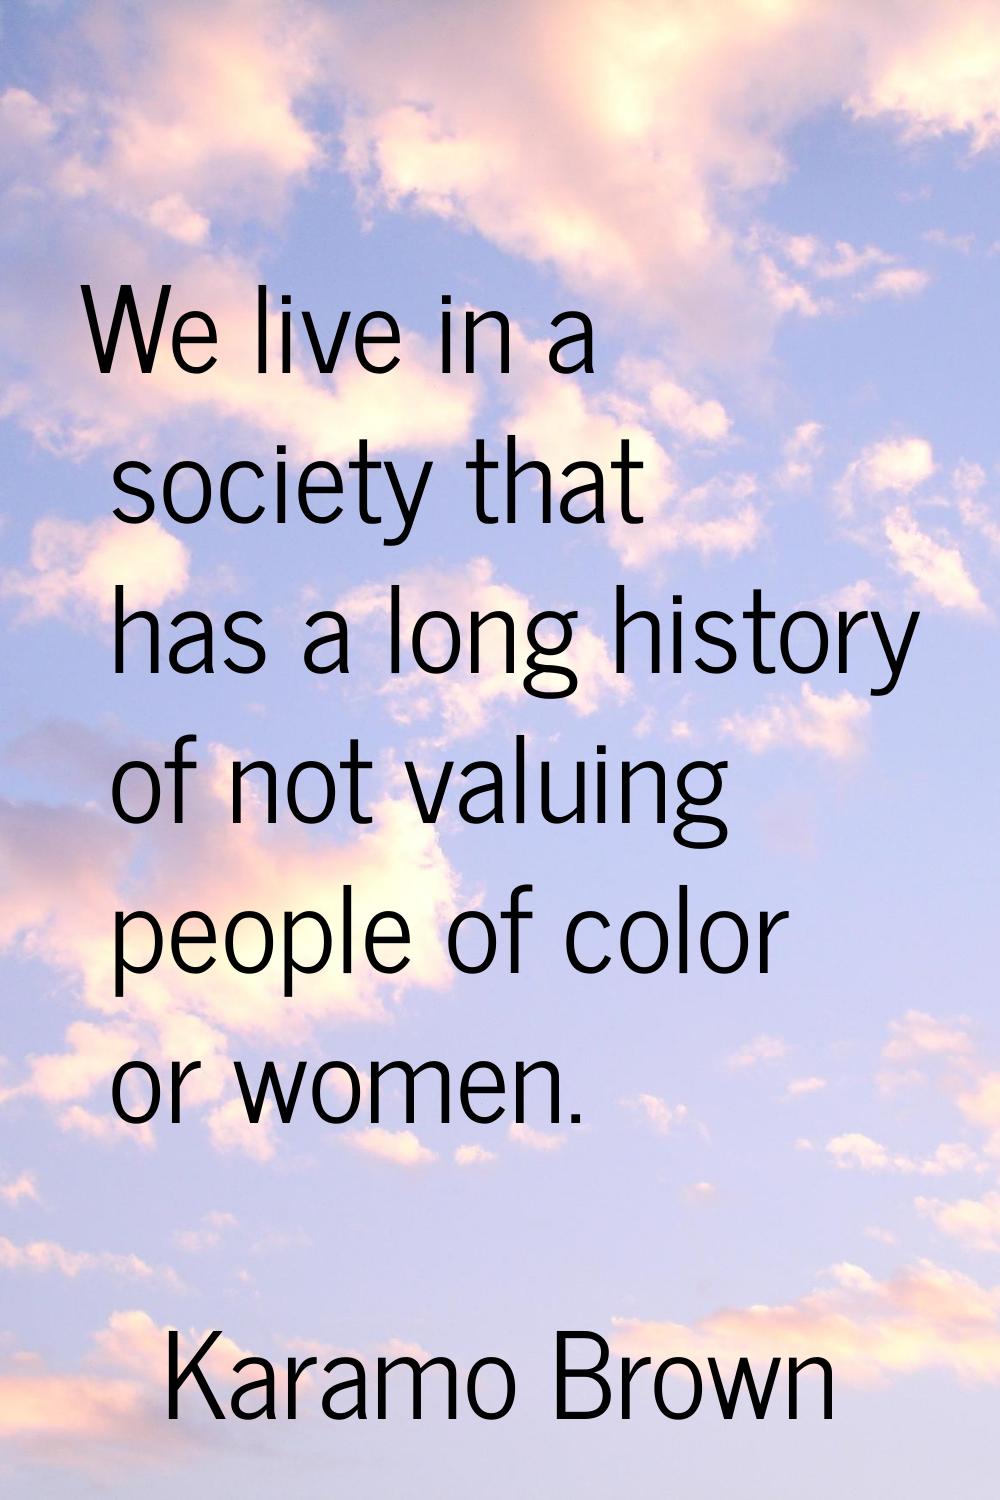 We live in a society that has a long history of not valuing people of color or women.